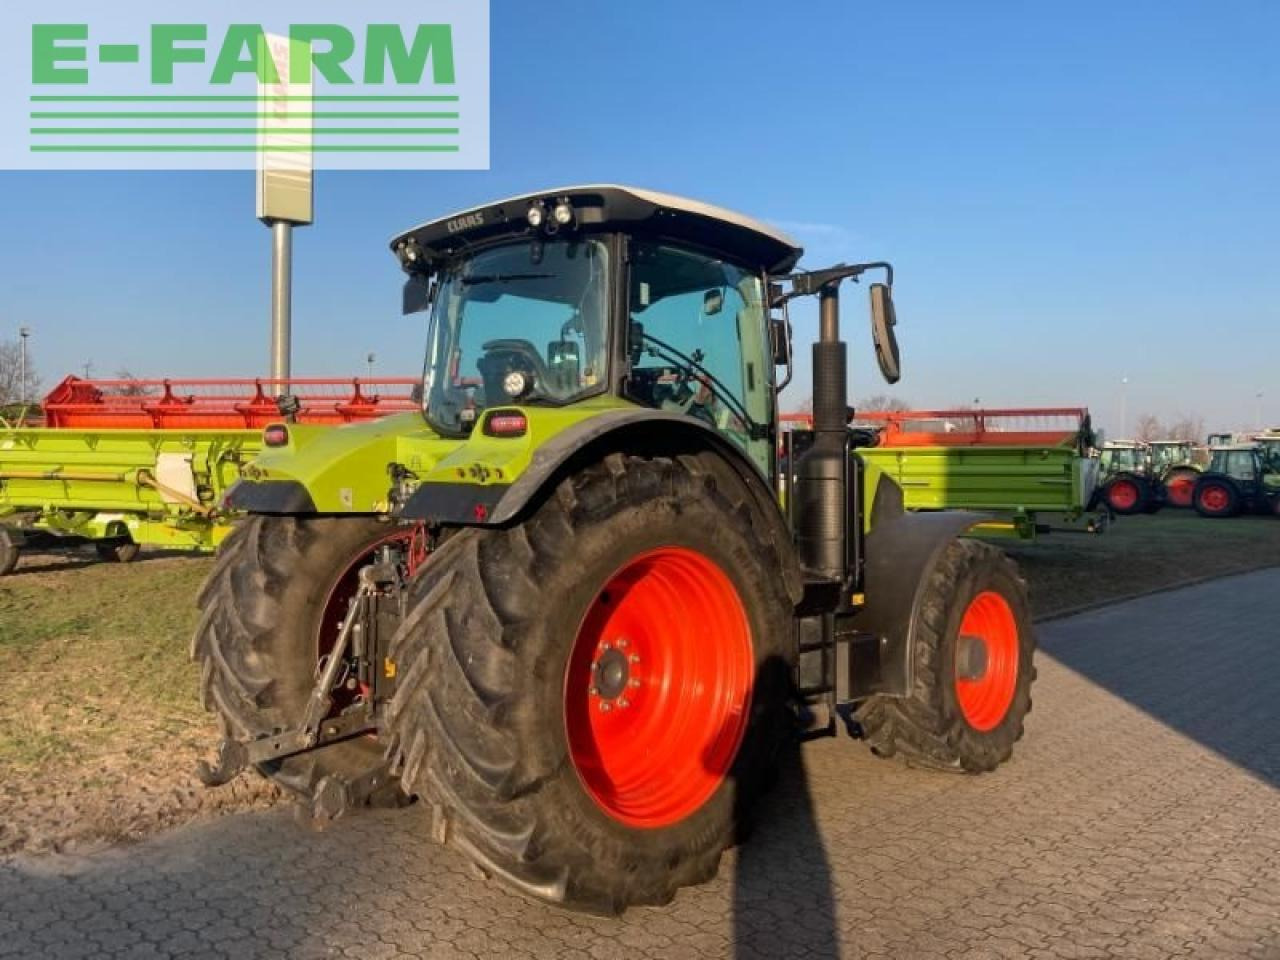 Farm tractor CLAAS arion 660 st4 cmatic